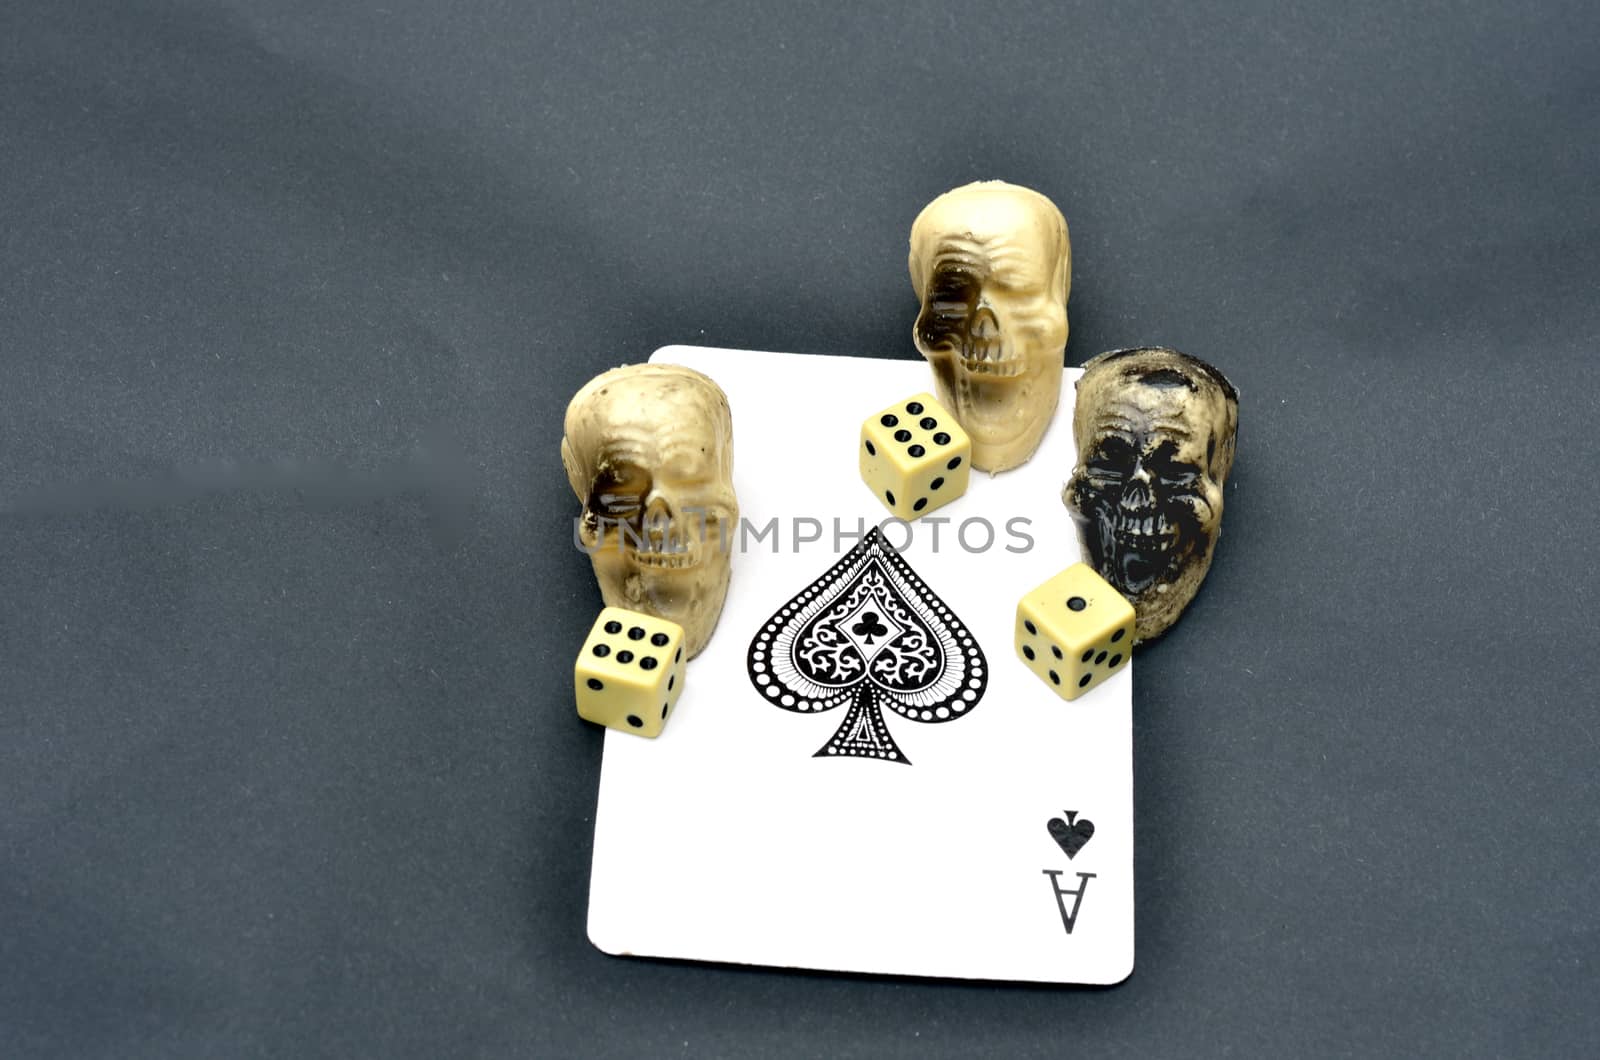 ace of spades and dice by pauws99